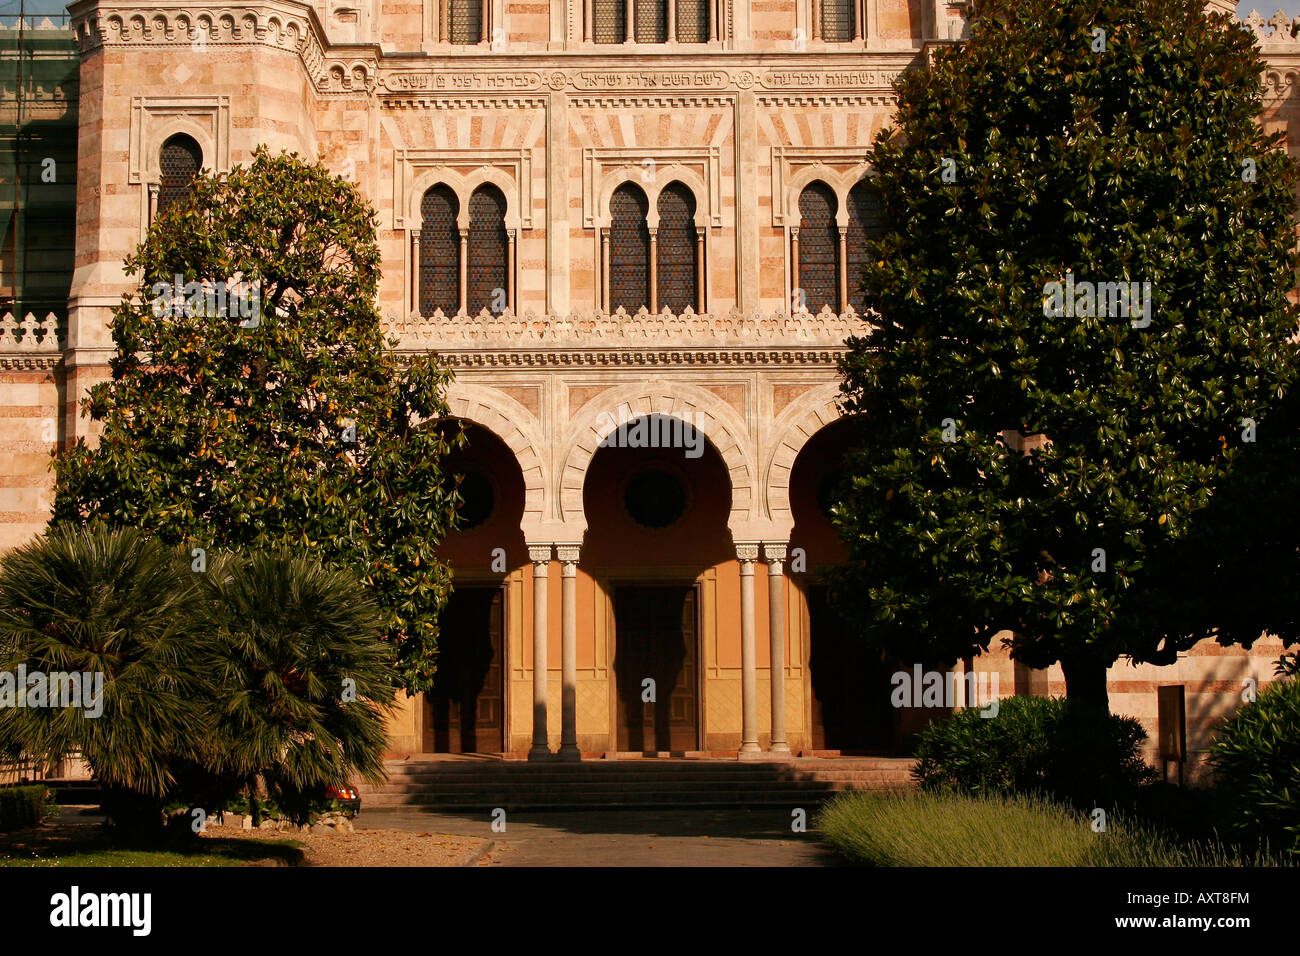 Main entrance to the synagogue in florence Italy Stock Photo